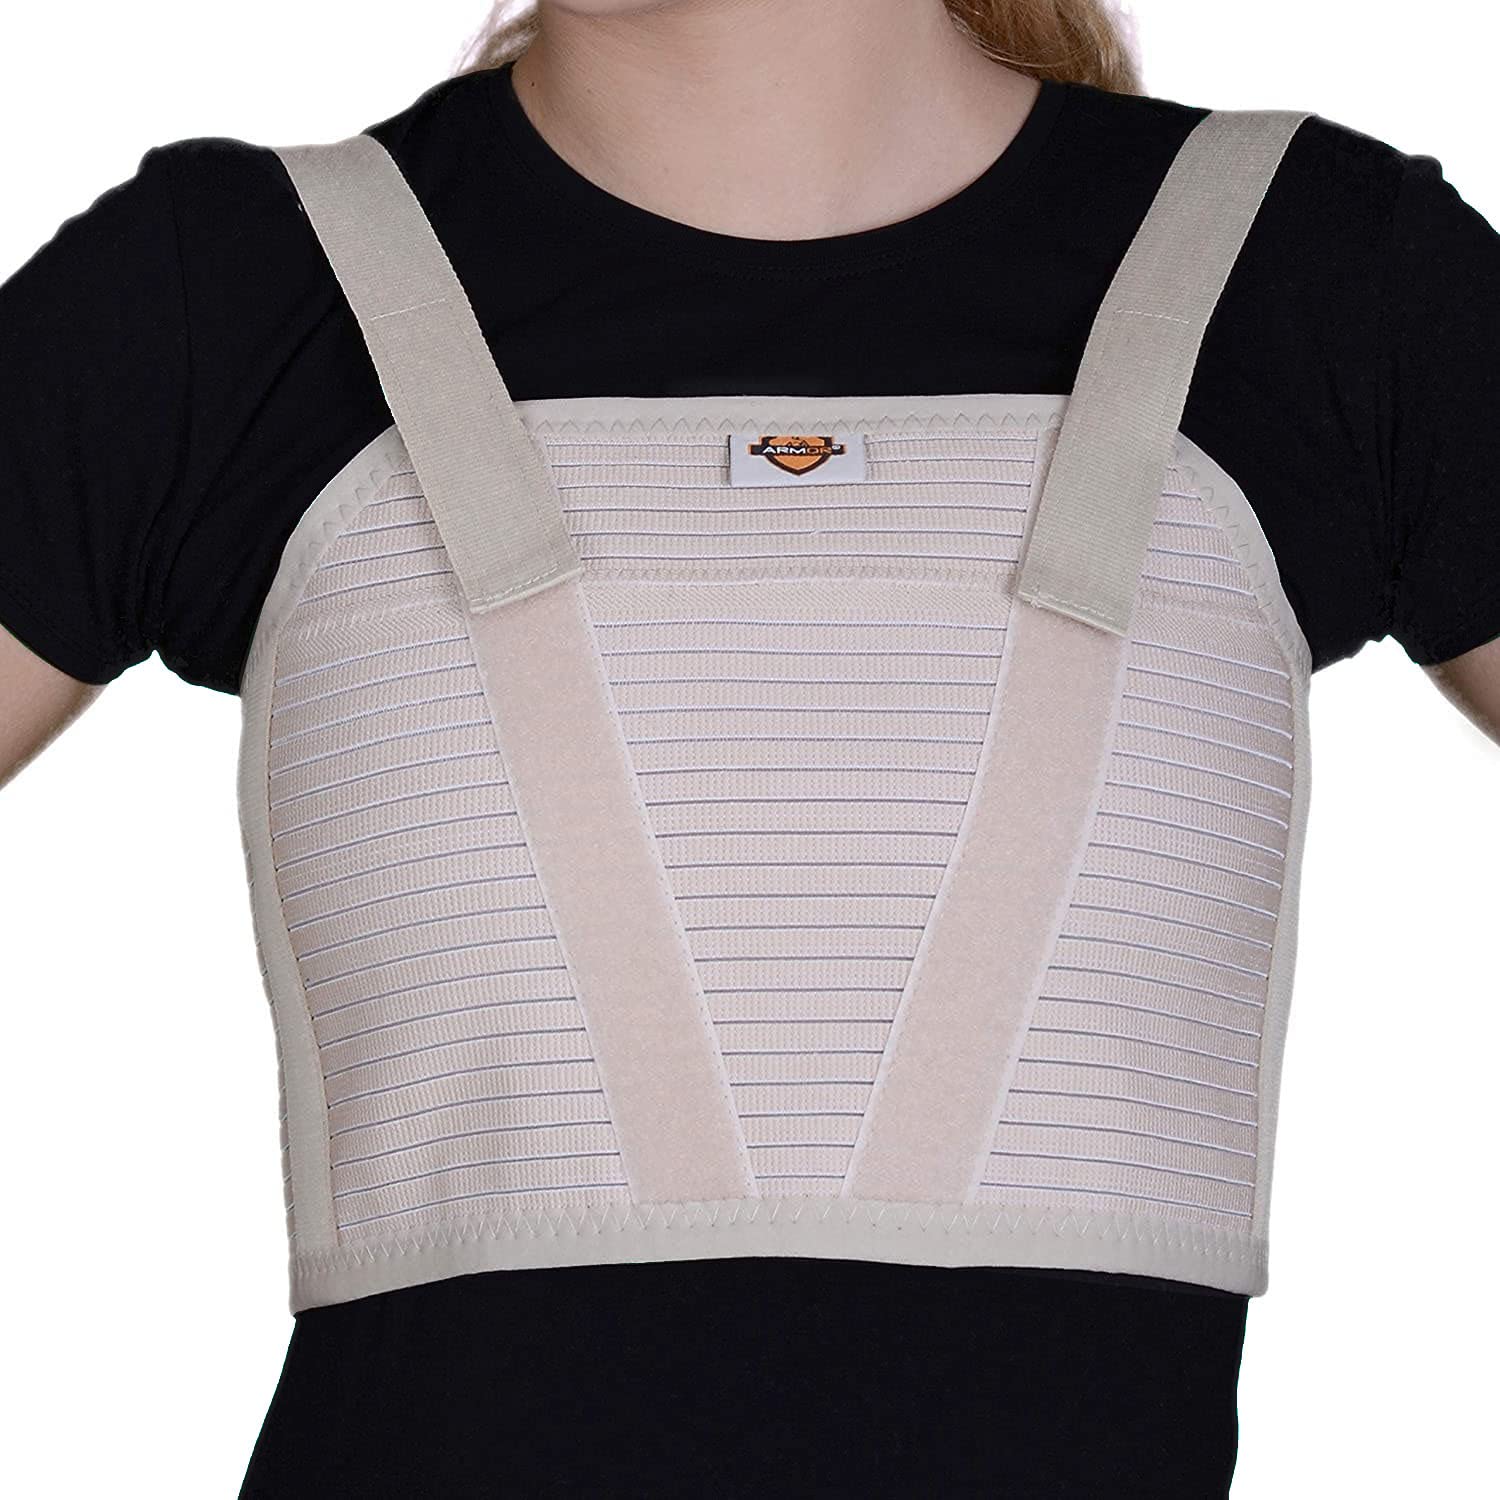 Armor Adult Unisex Chest Support Brace to Stabilize the Thorax after Open  Heart Surgery Thoracic Procedure or Fractures of the Sternum or Rib Cage  Tan Color Size Large for Men and Women